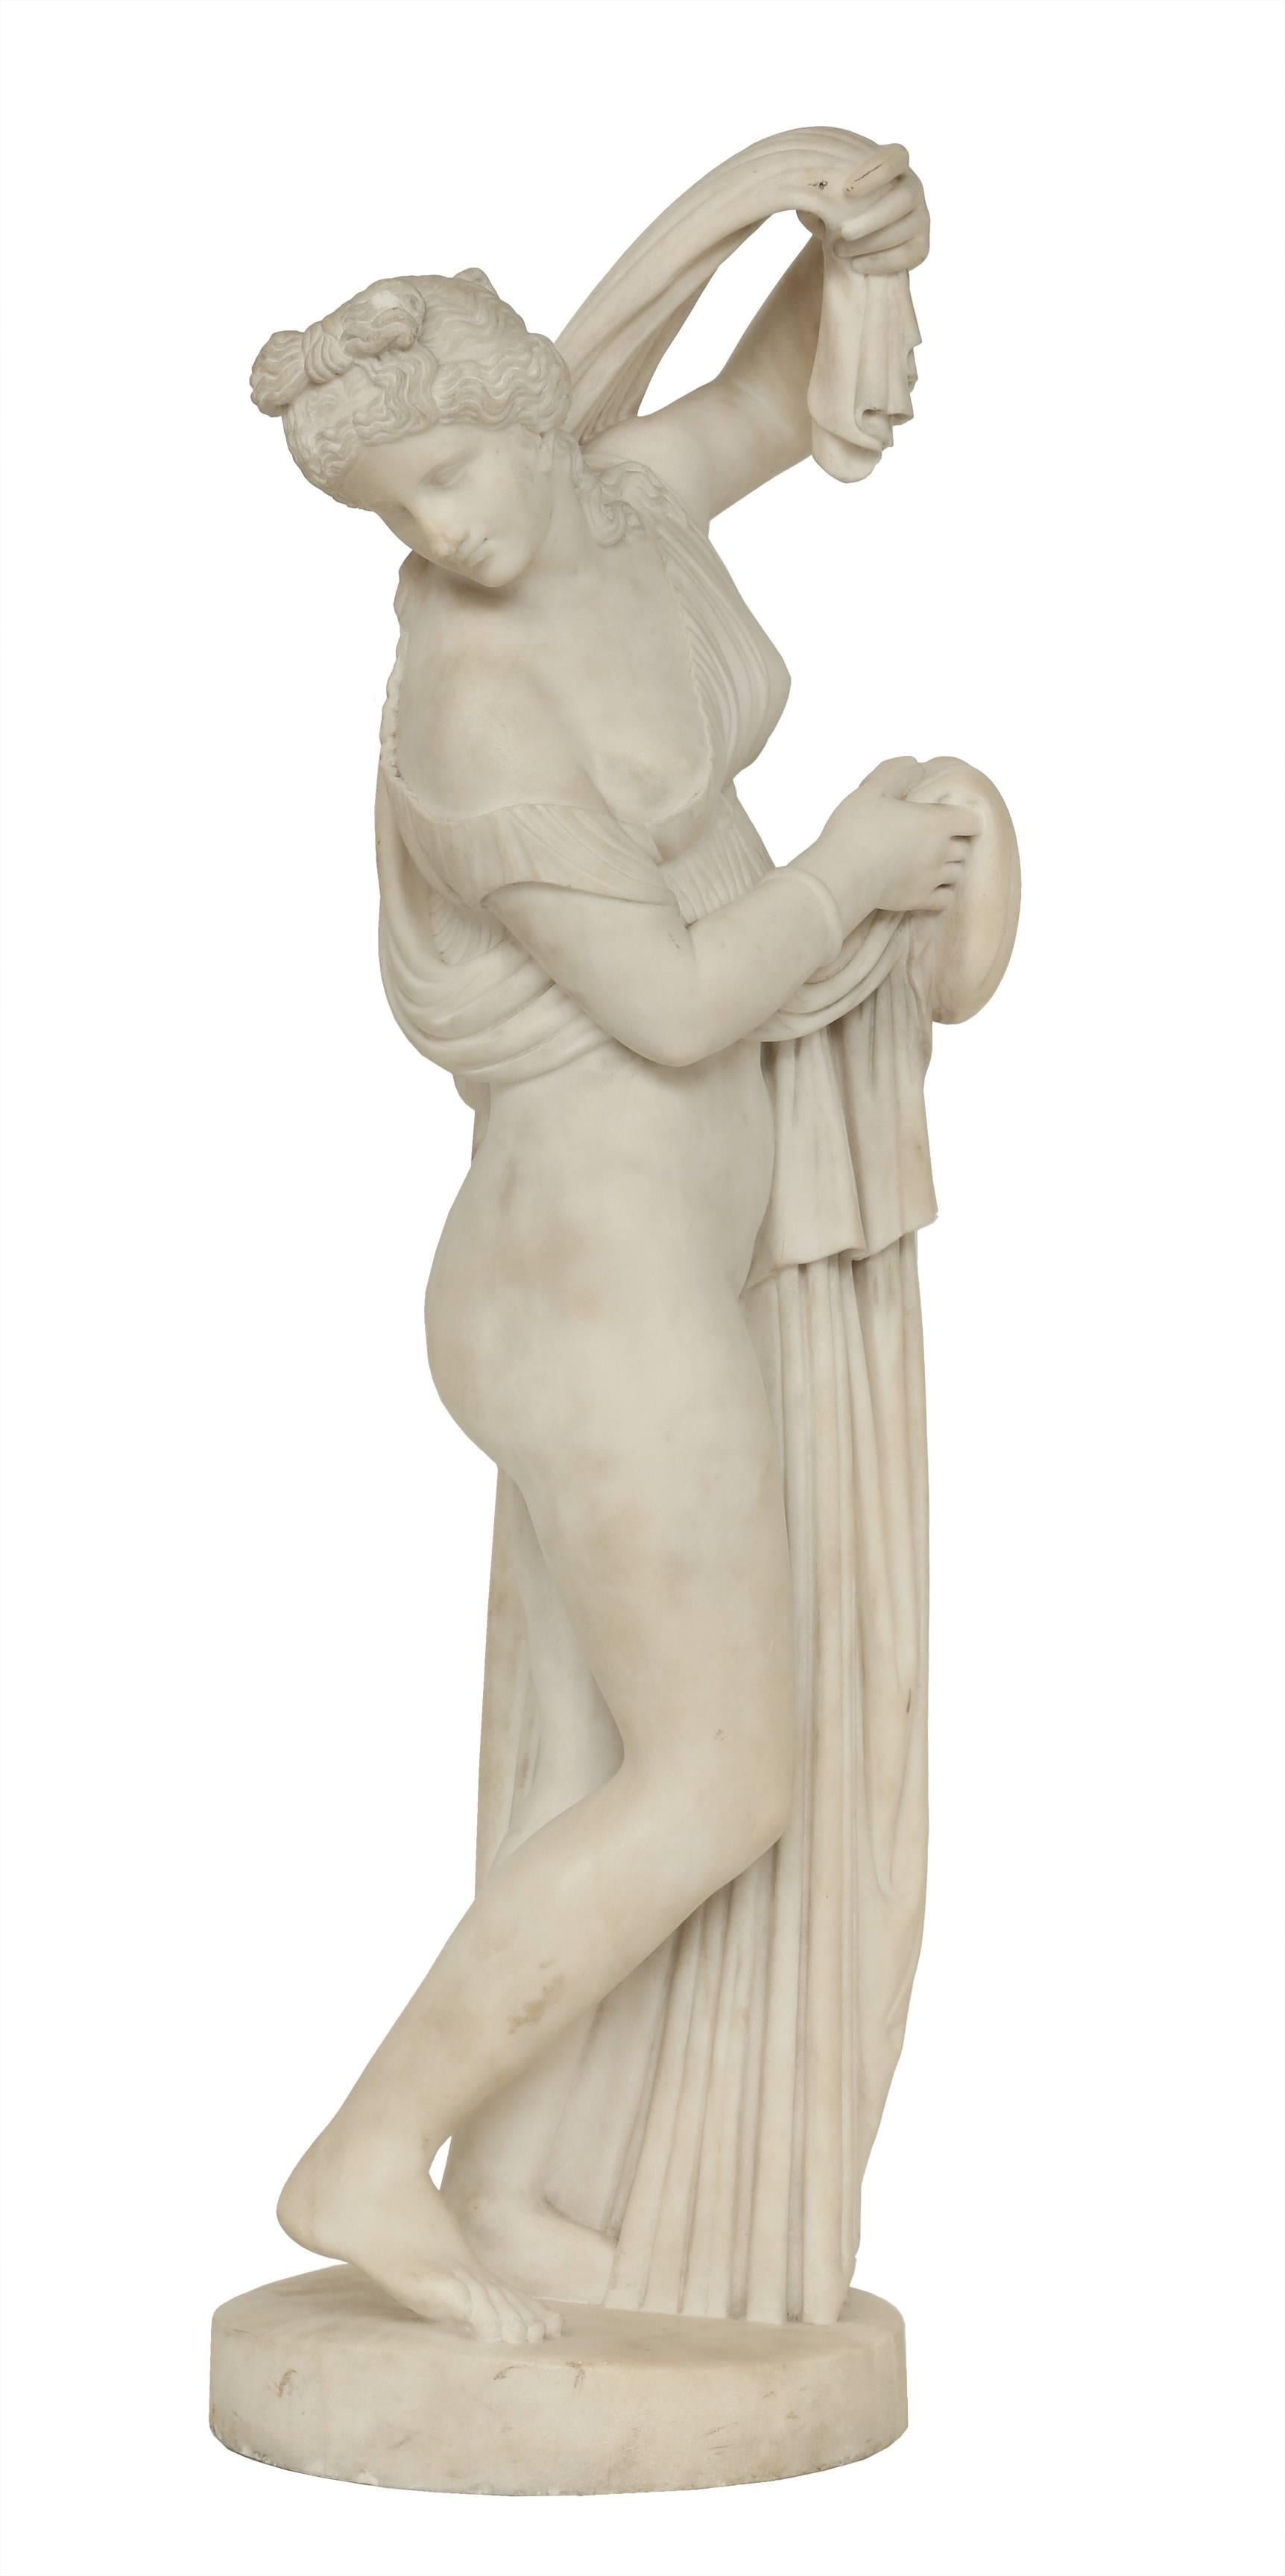 An exquisite Italian early 19th century white Carrara marble sculpture of Venus Callipyge, signed J VACCA NAPOLI 1809. The statue is masterfully sculpted out of one solid piece of marble. The elegant maiden is raised on a circular base, draped in